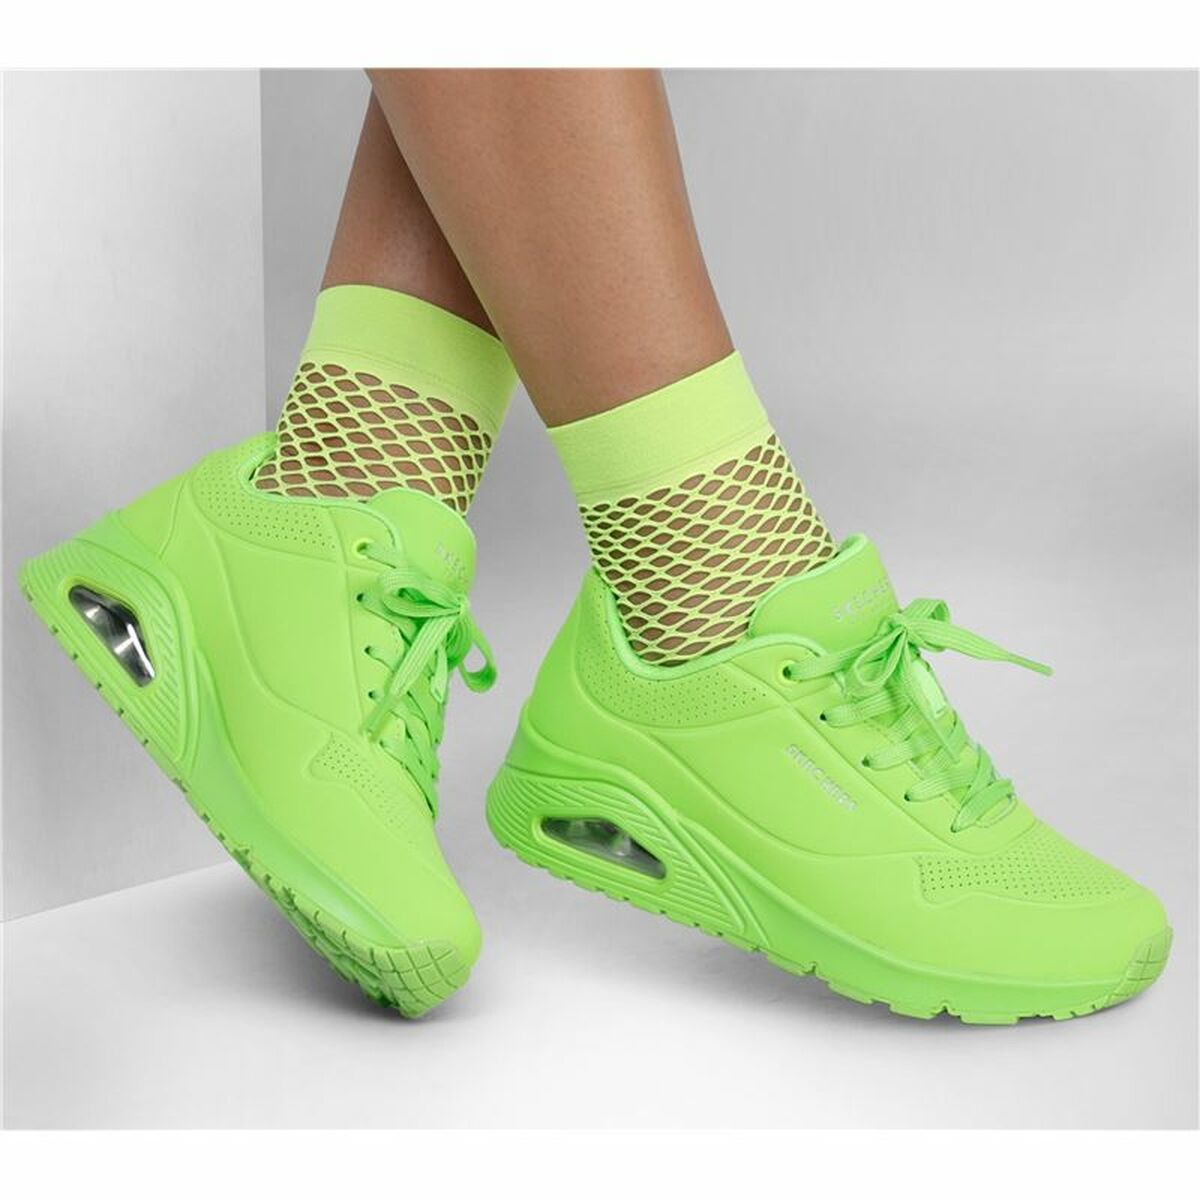 Sports Trainers for Women Skechers Uno - Night Shades Lime